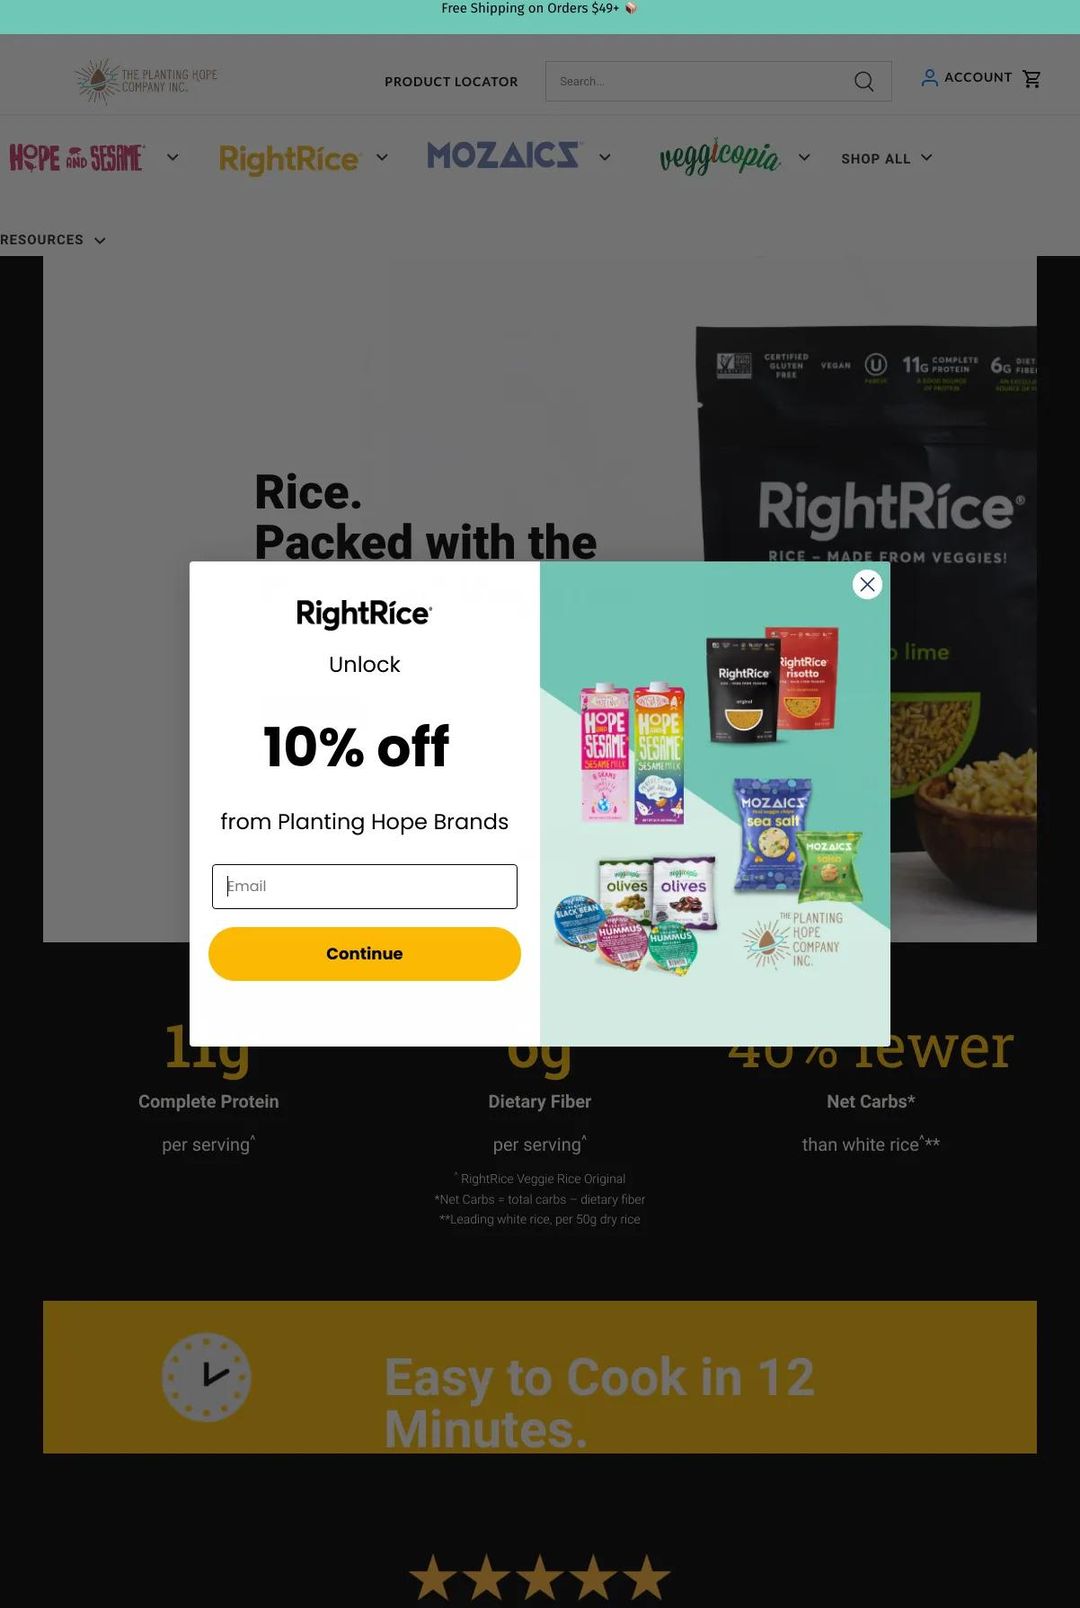 Screenshot 1 of RightRice (Example Shopify Food and Beverage Website)